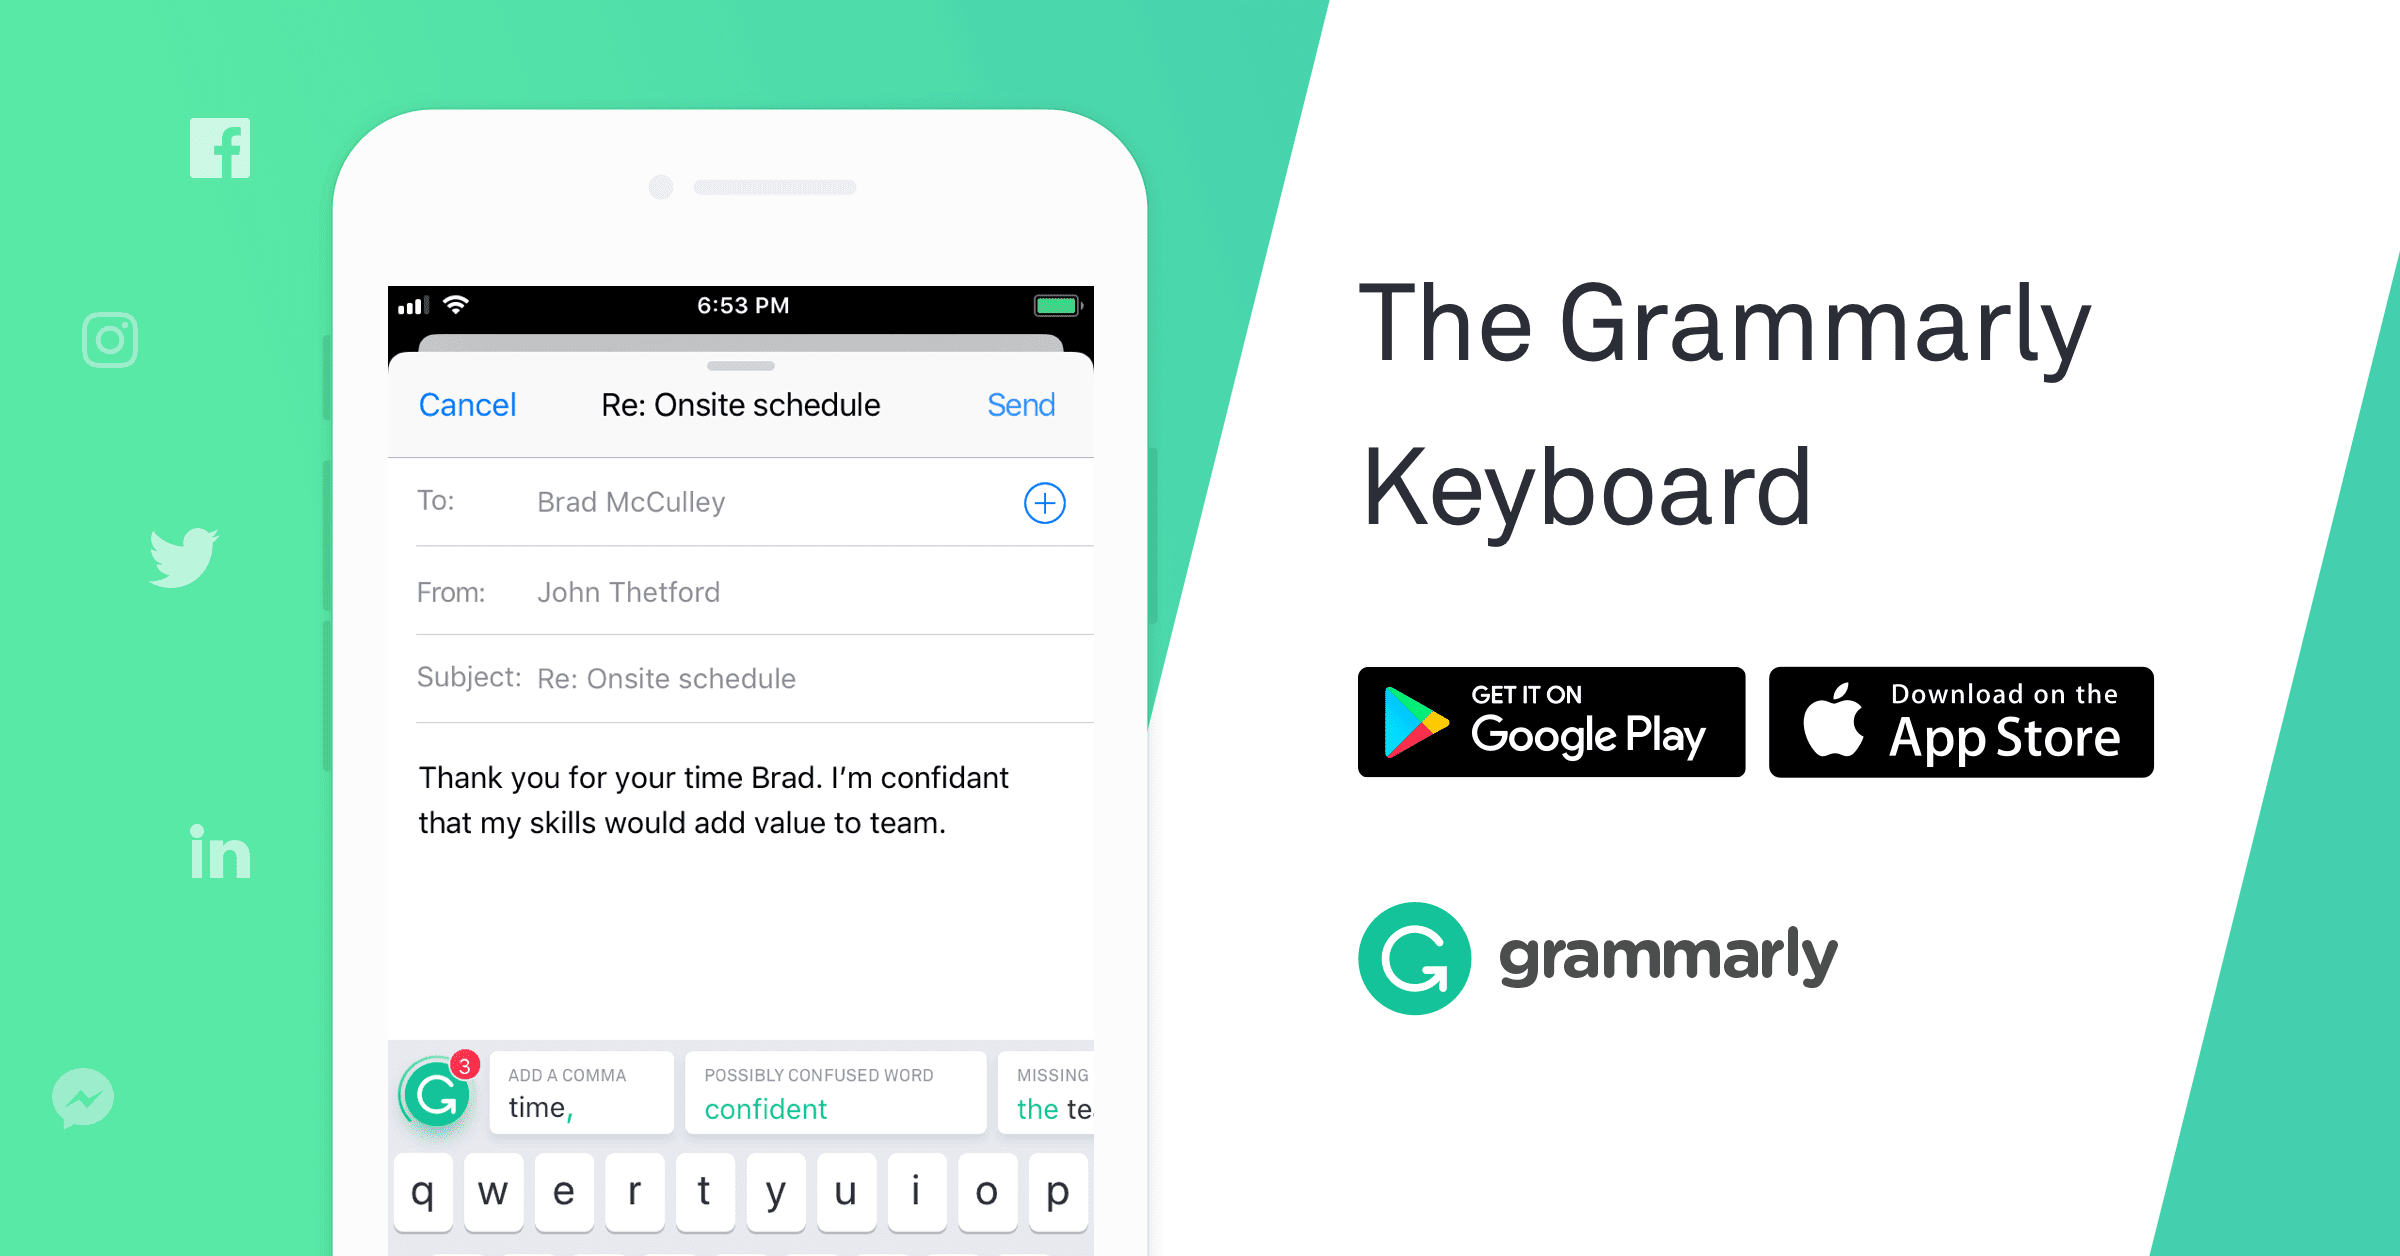 how is grammarly free